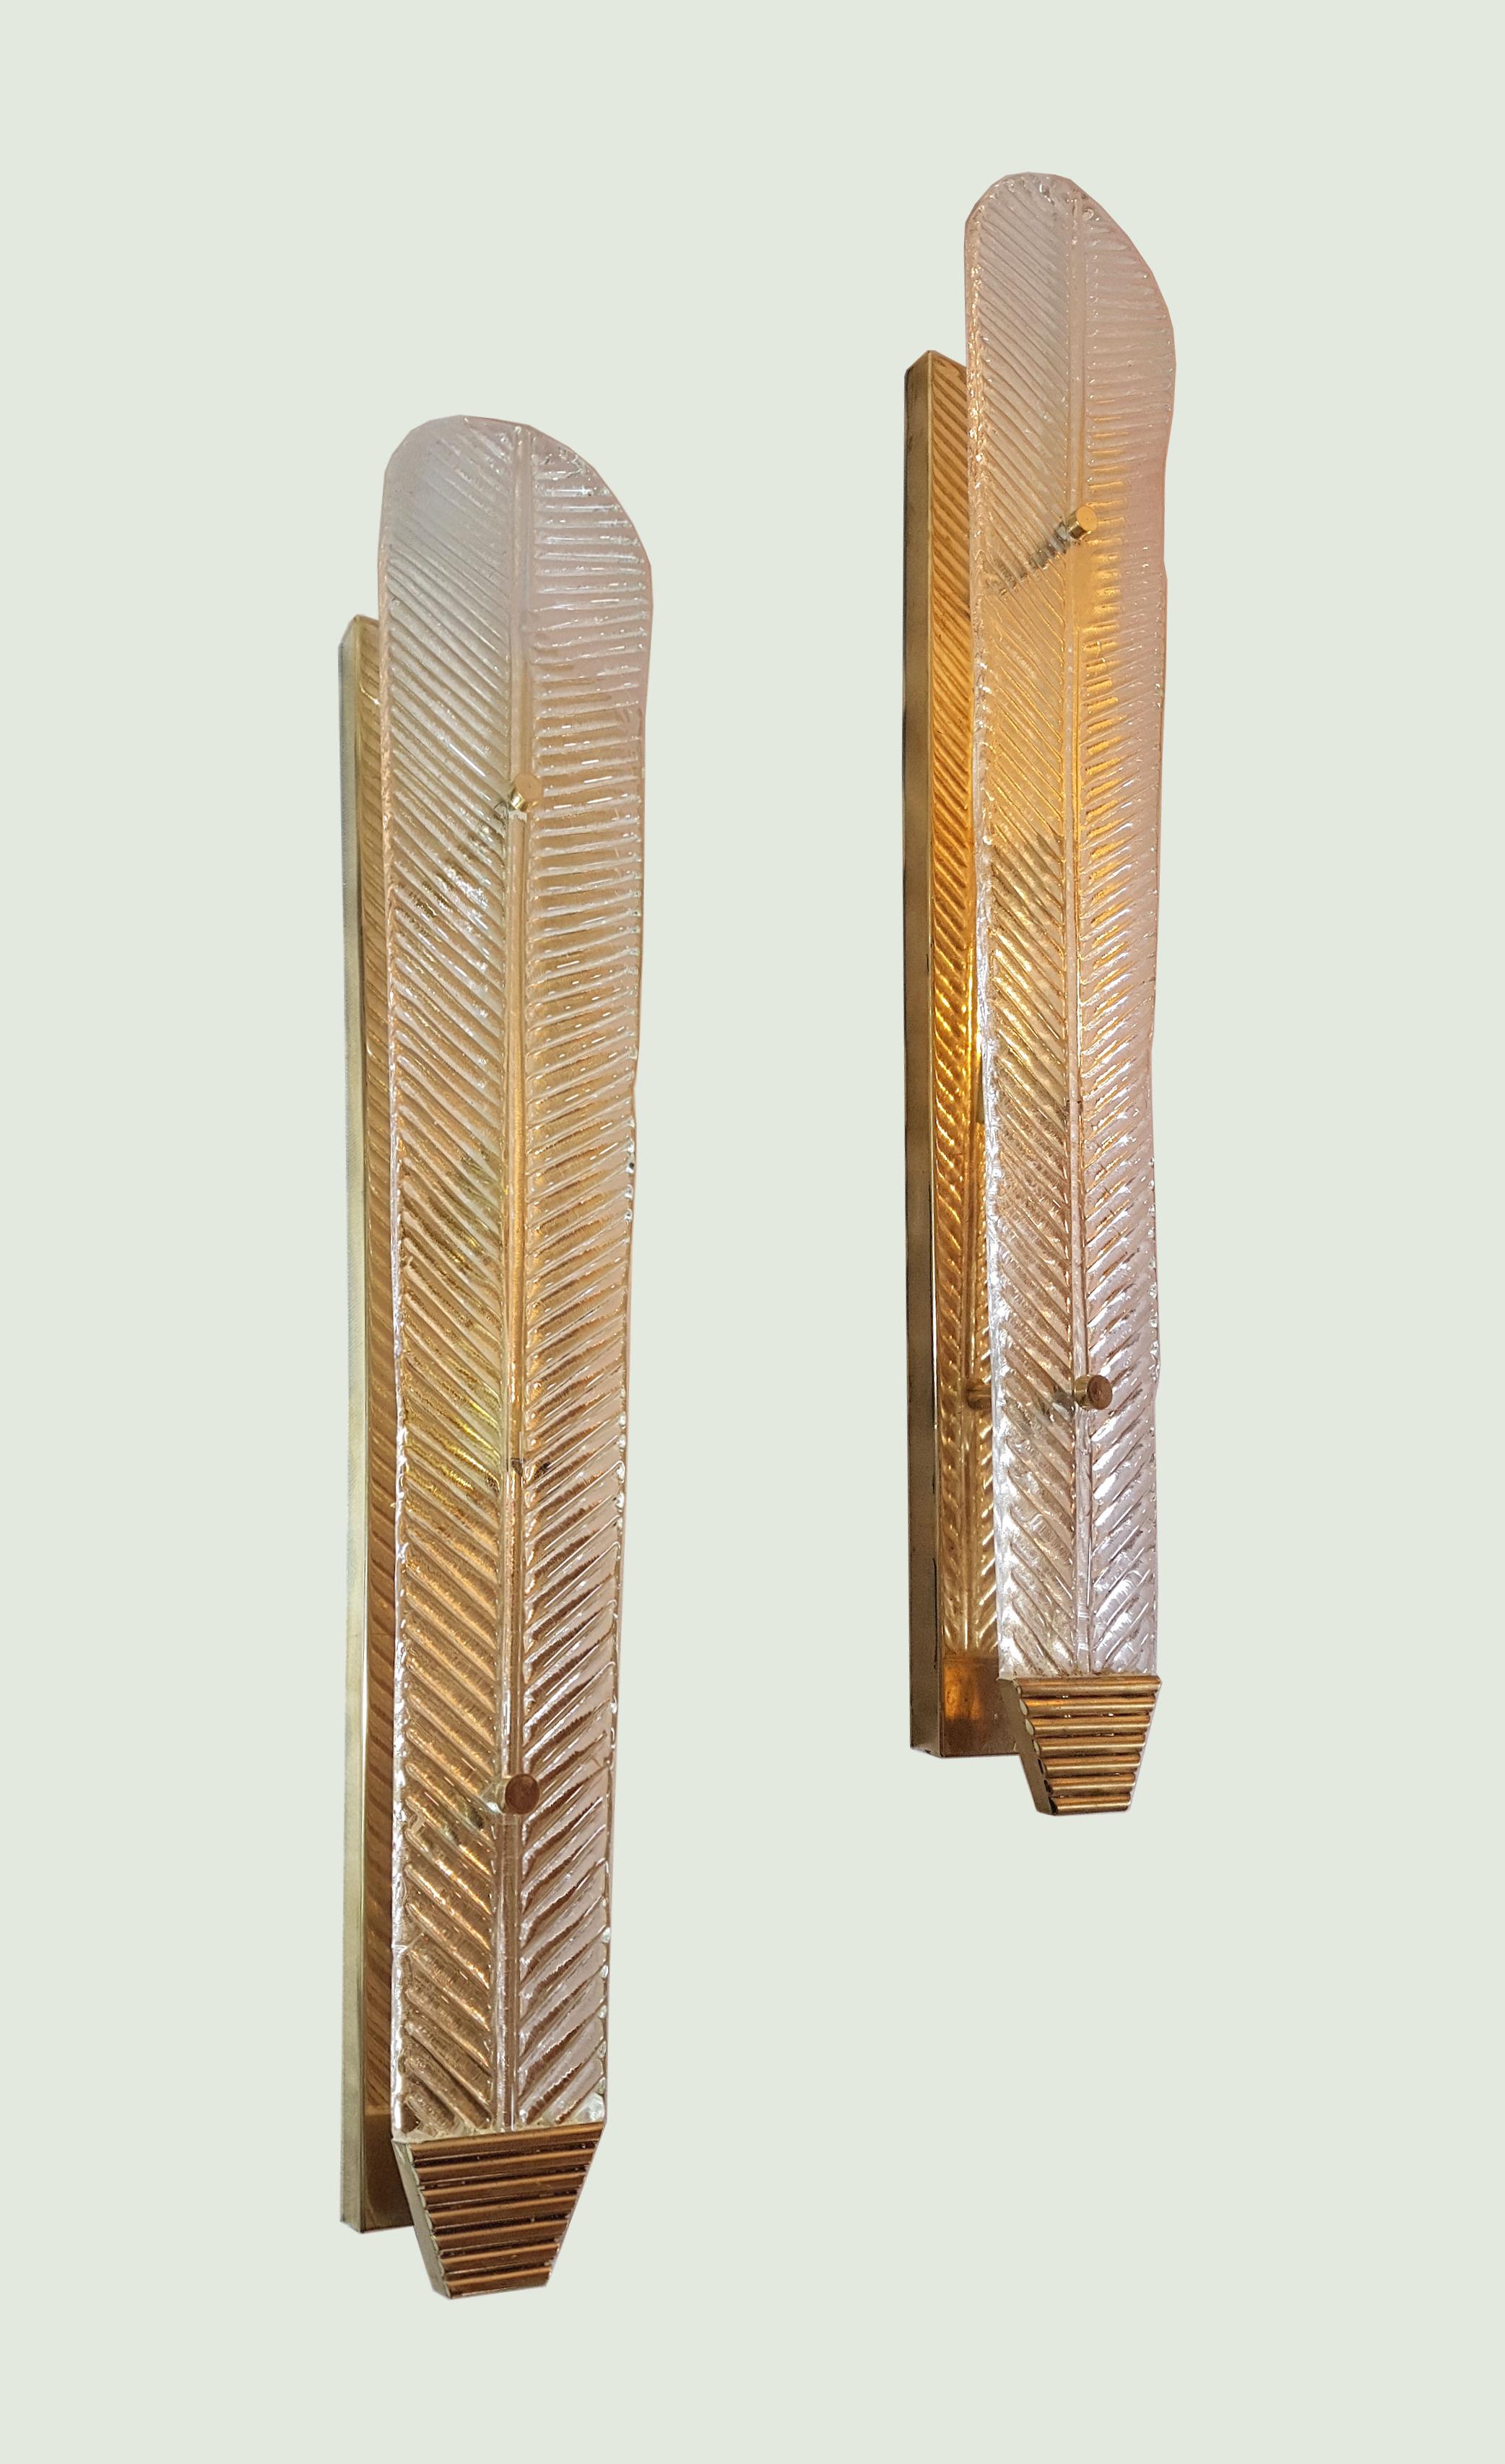 Hand-Crafted Very Long Murano Clear Glass Leave Sconces, Mid-Century Modern, by Barovier 1960